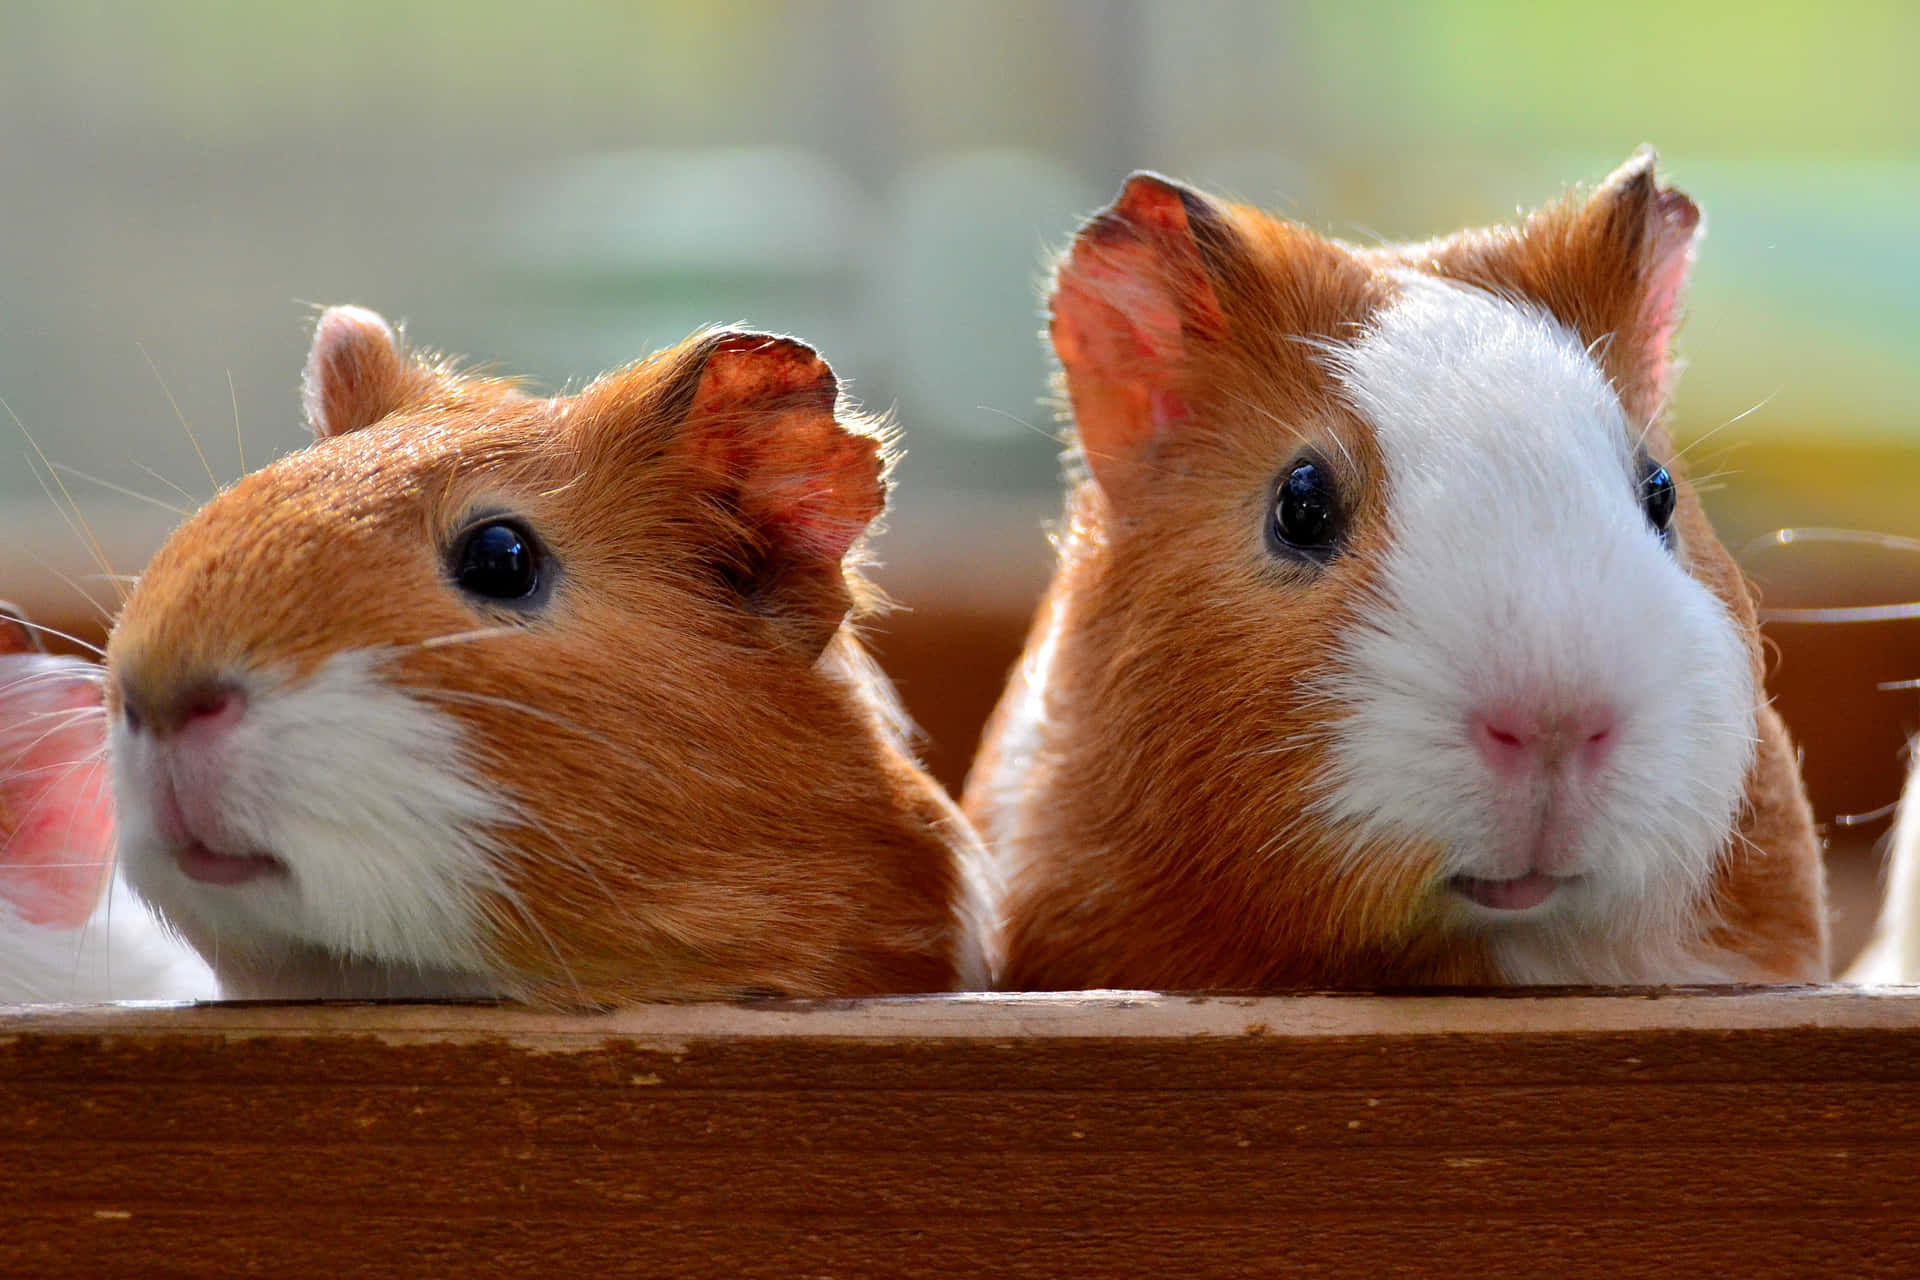 three guinea pigs are sitting in a wooden box